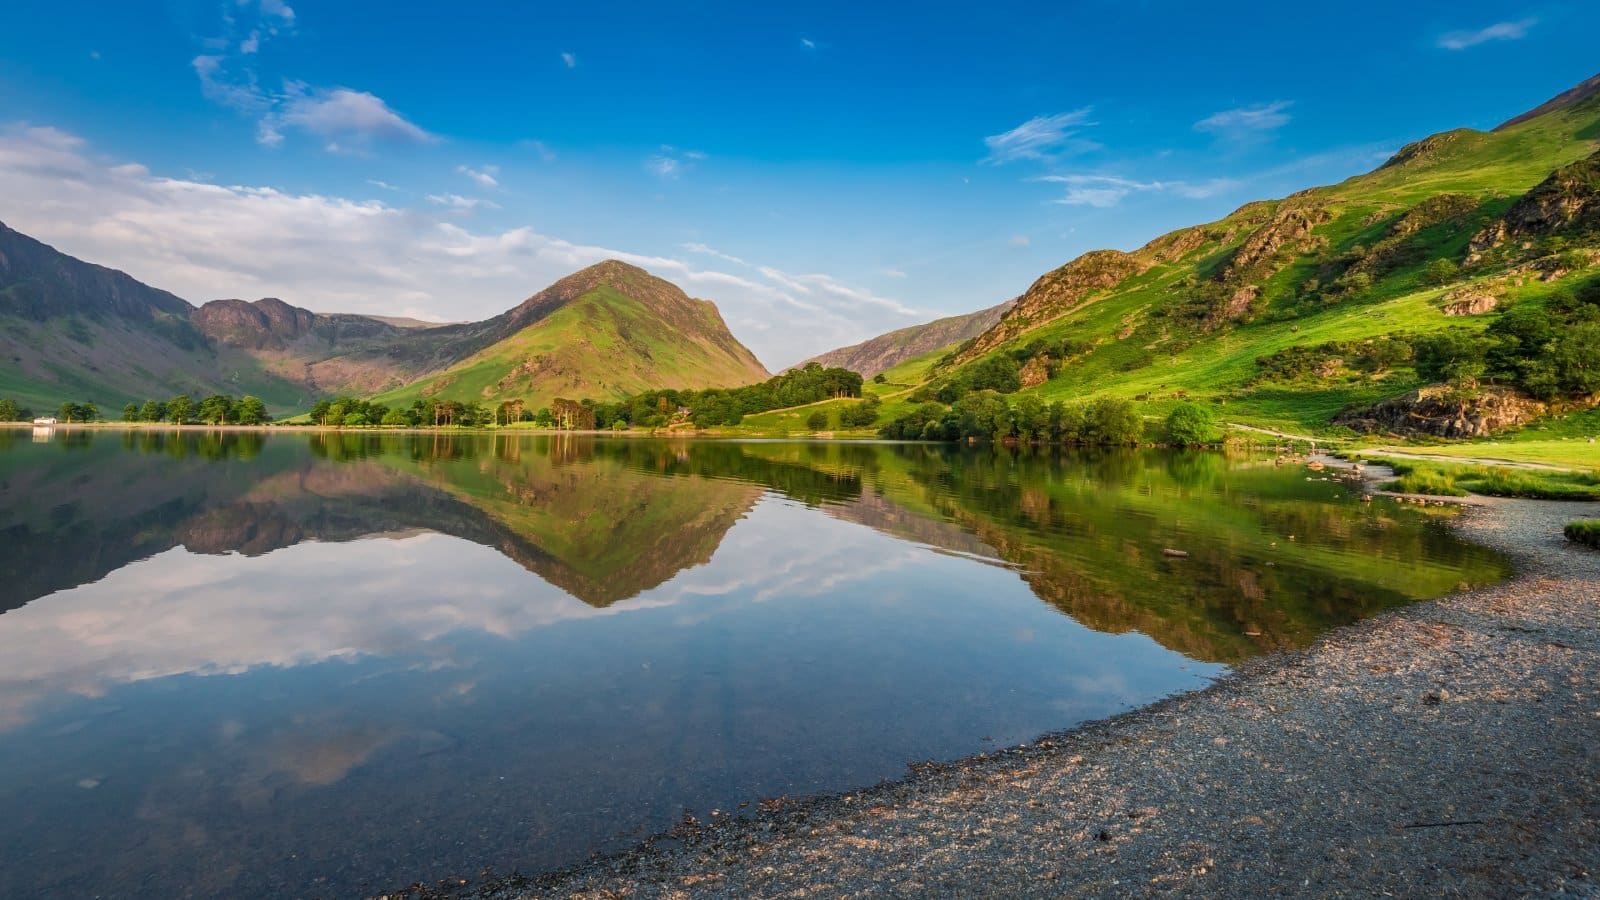 Image Credit: Shutterstock / Shaiith <p>The Lake District deserves a special mention for its commitment to keeping the UK damp. It’s a stunningly beautiful region that has made peace with its perpetual moistness.</p>